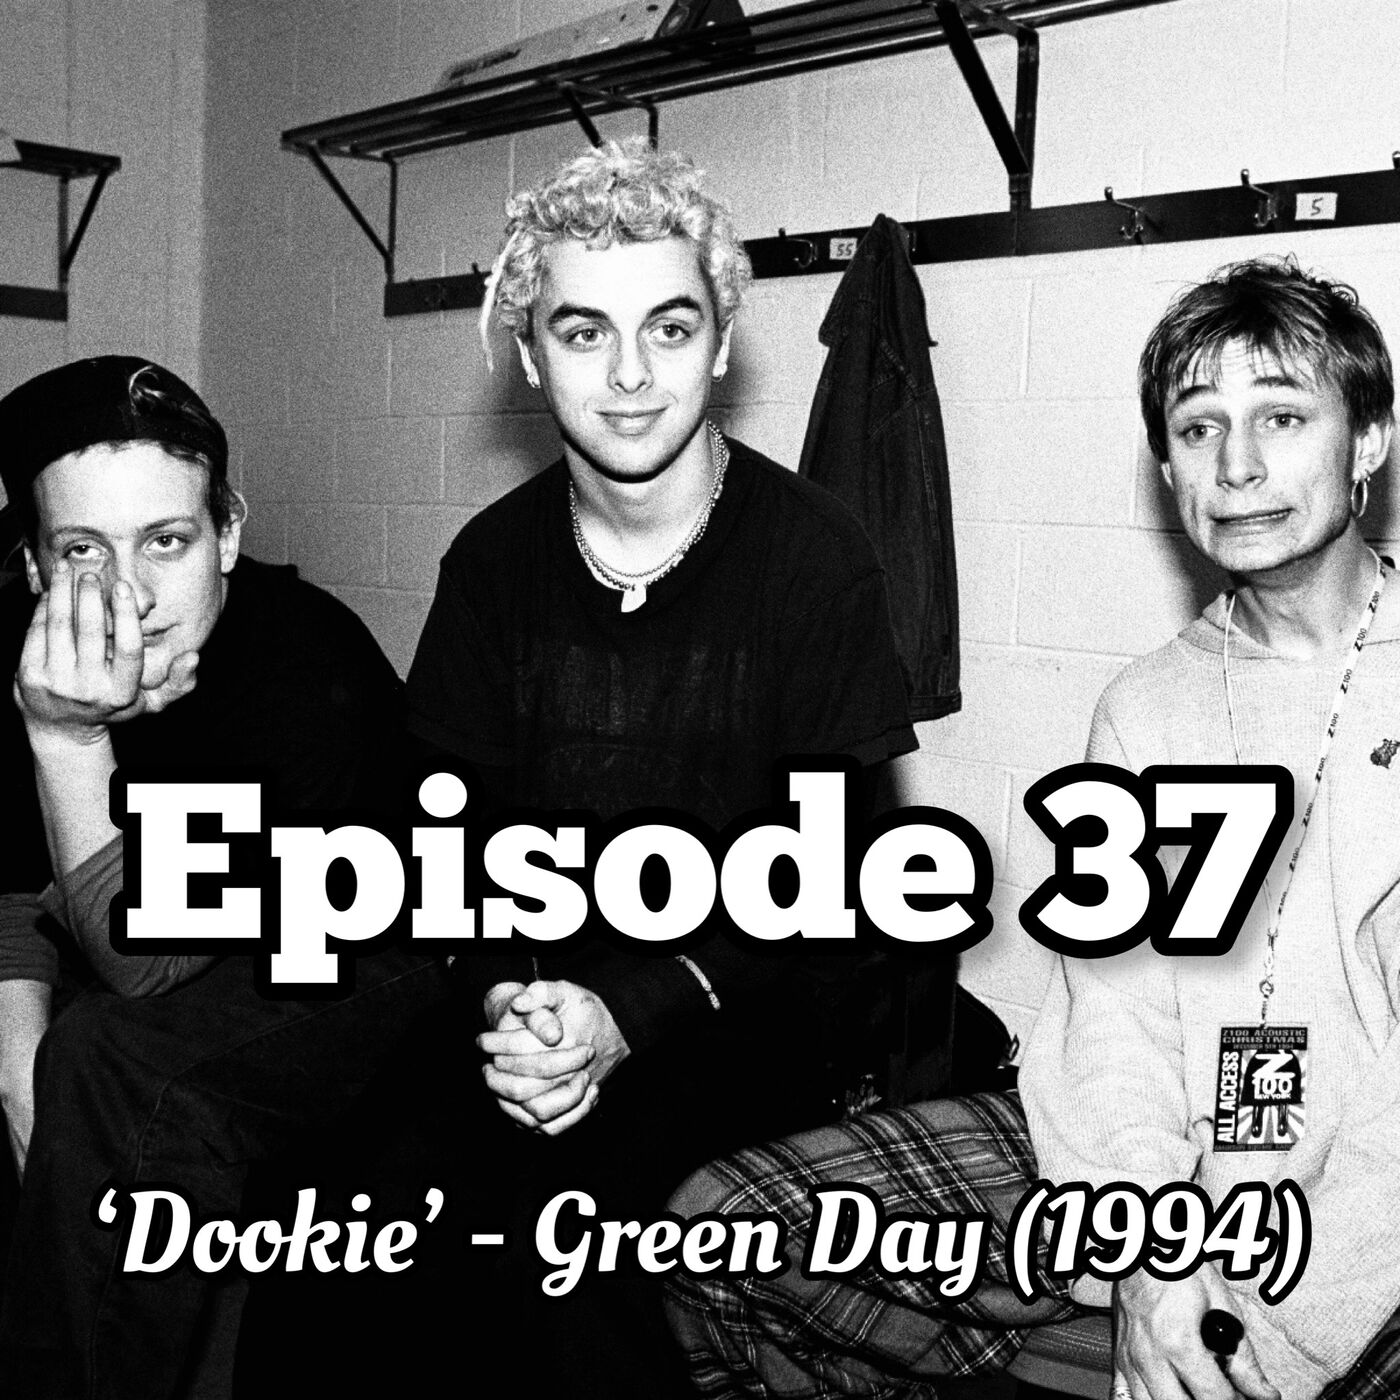 37. 'Dookie' - Green Day (1994)